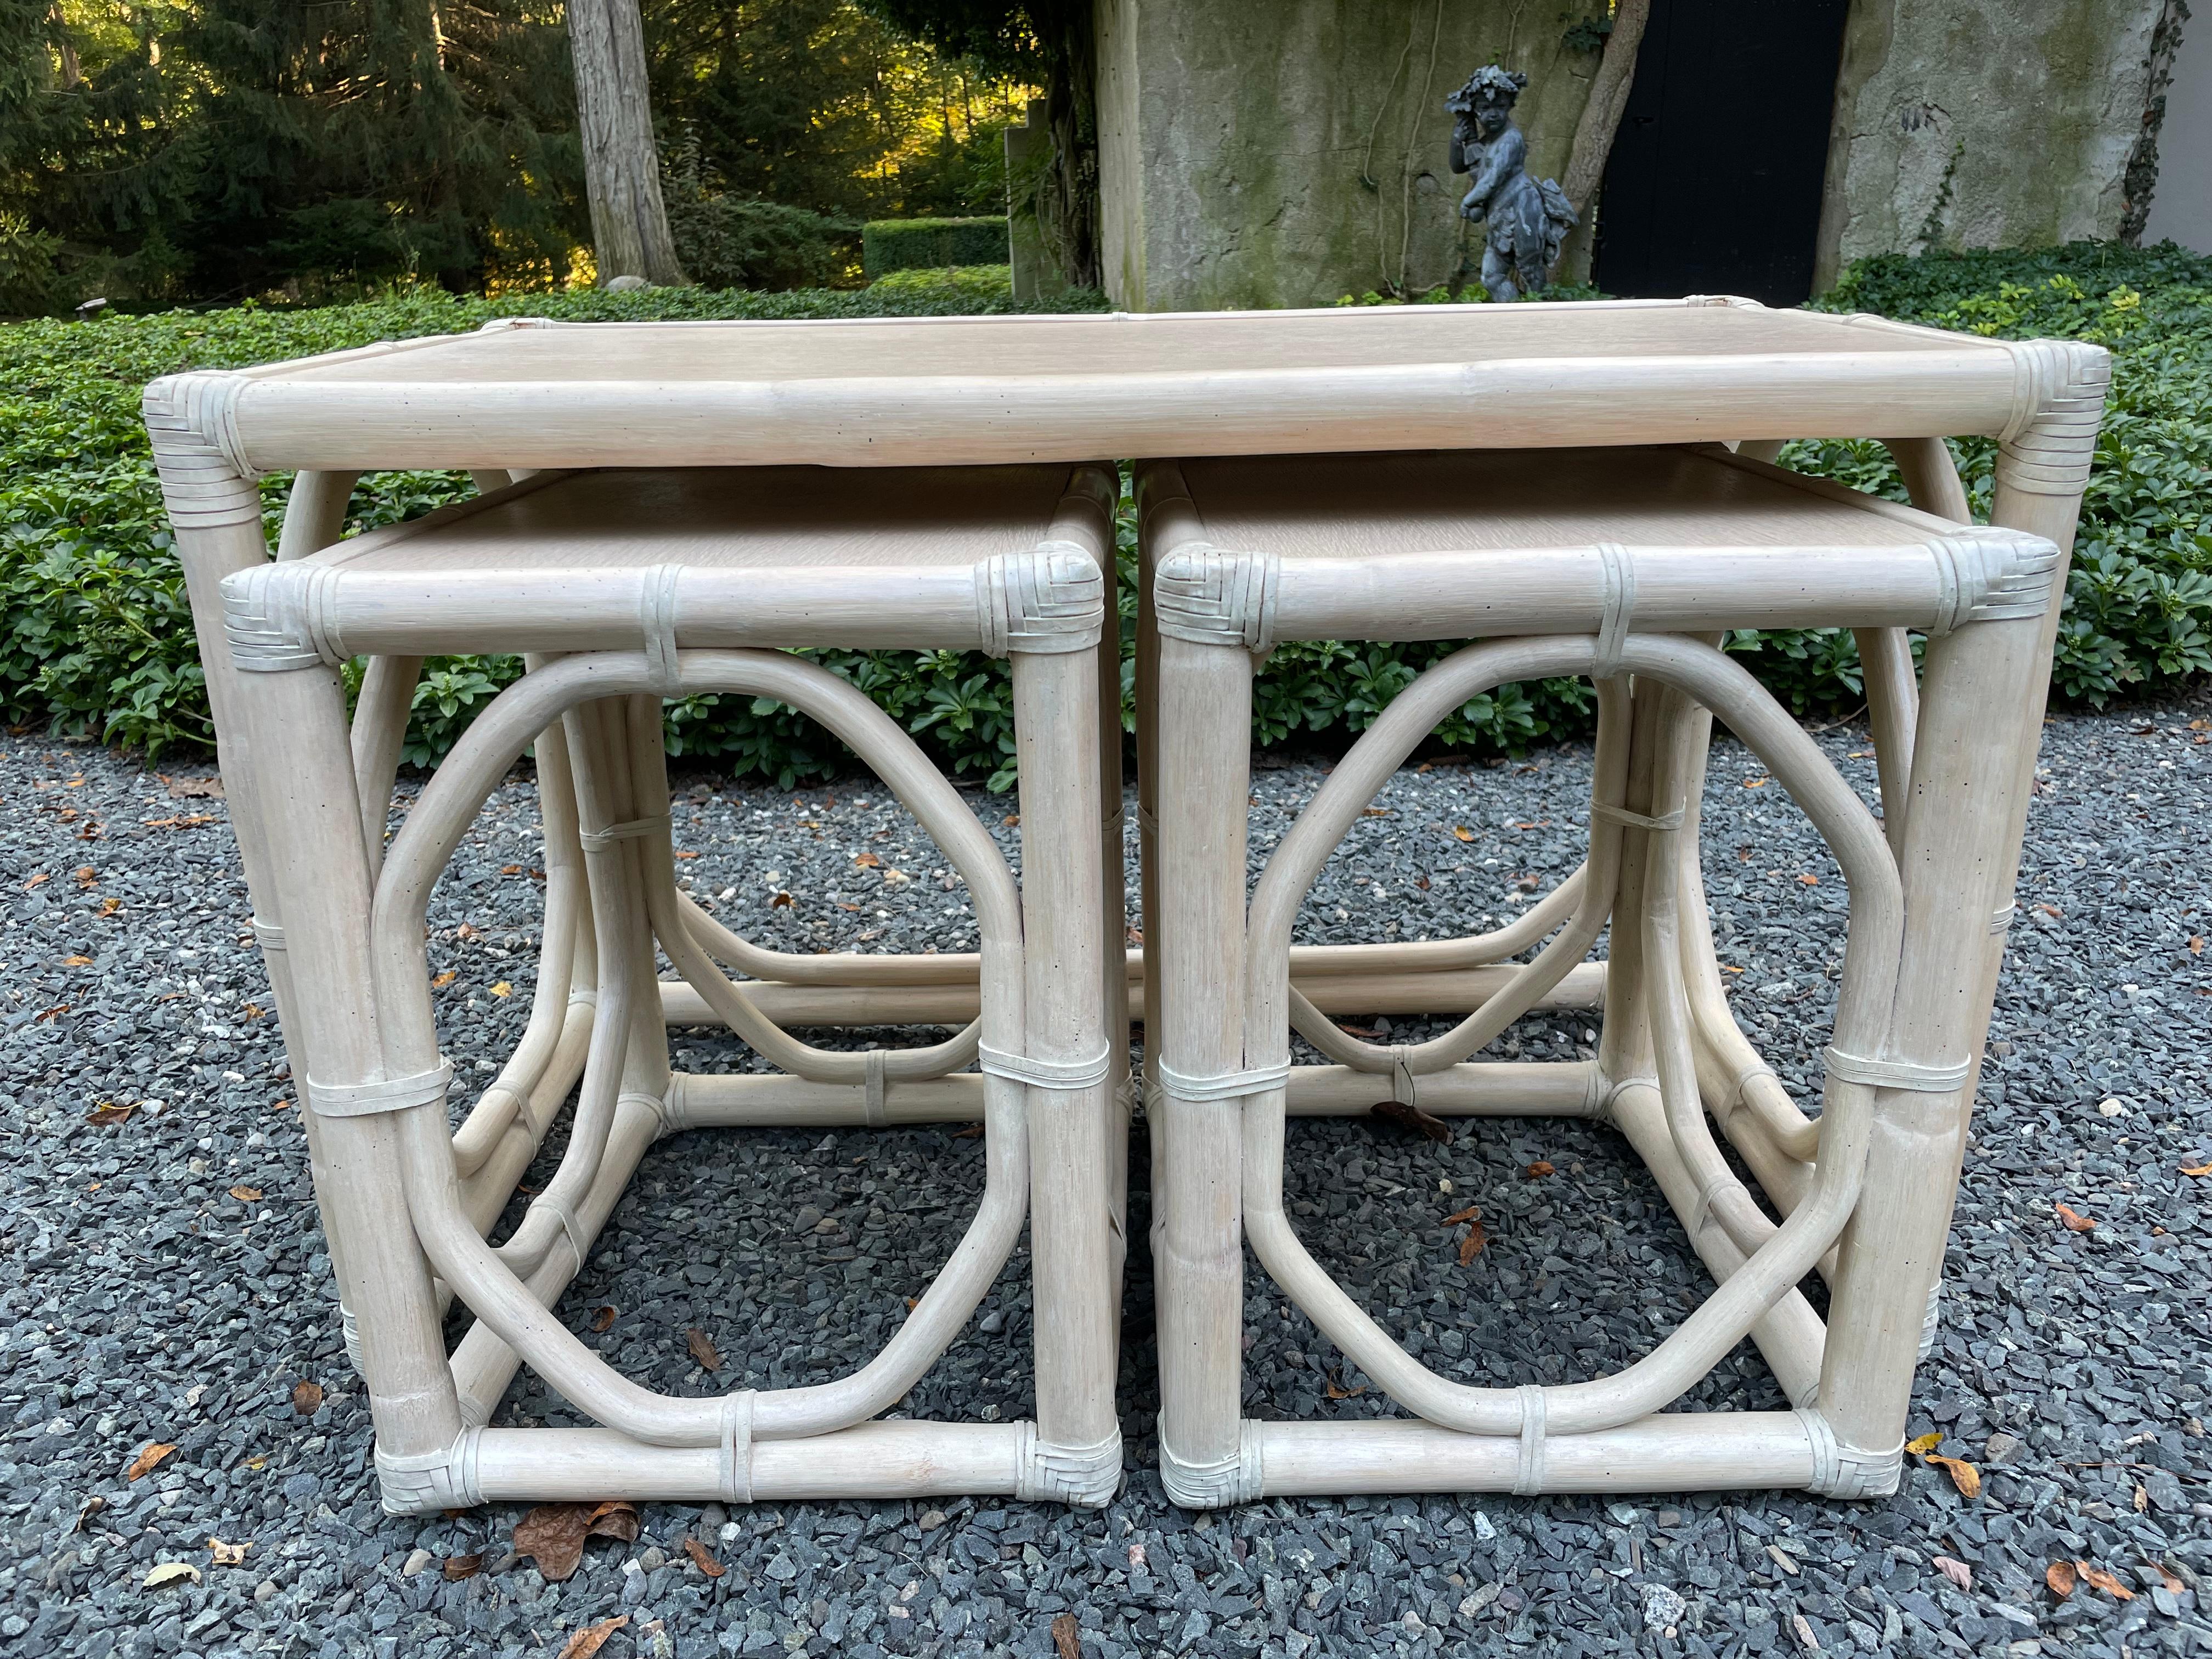 This a set of three nesting tables in cerused wood by McGuire. The largest table is a coffee table (measurements provided below) and the two tables that tuck underneath measure 18.5” tall x 16” wide x 14” deep. This design is a great way of having